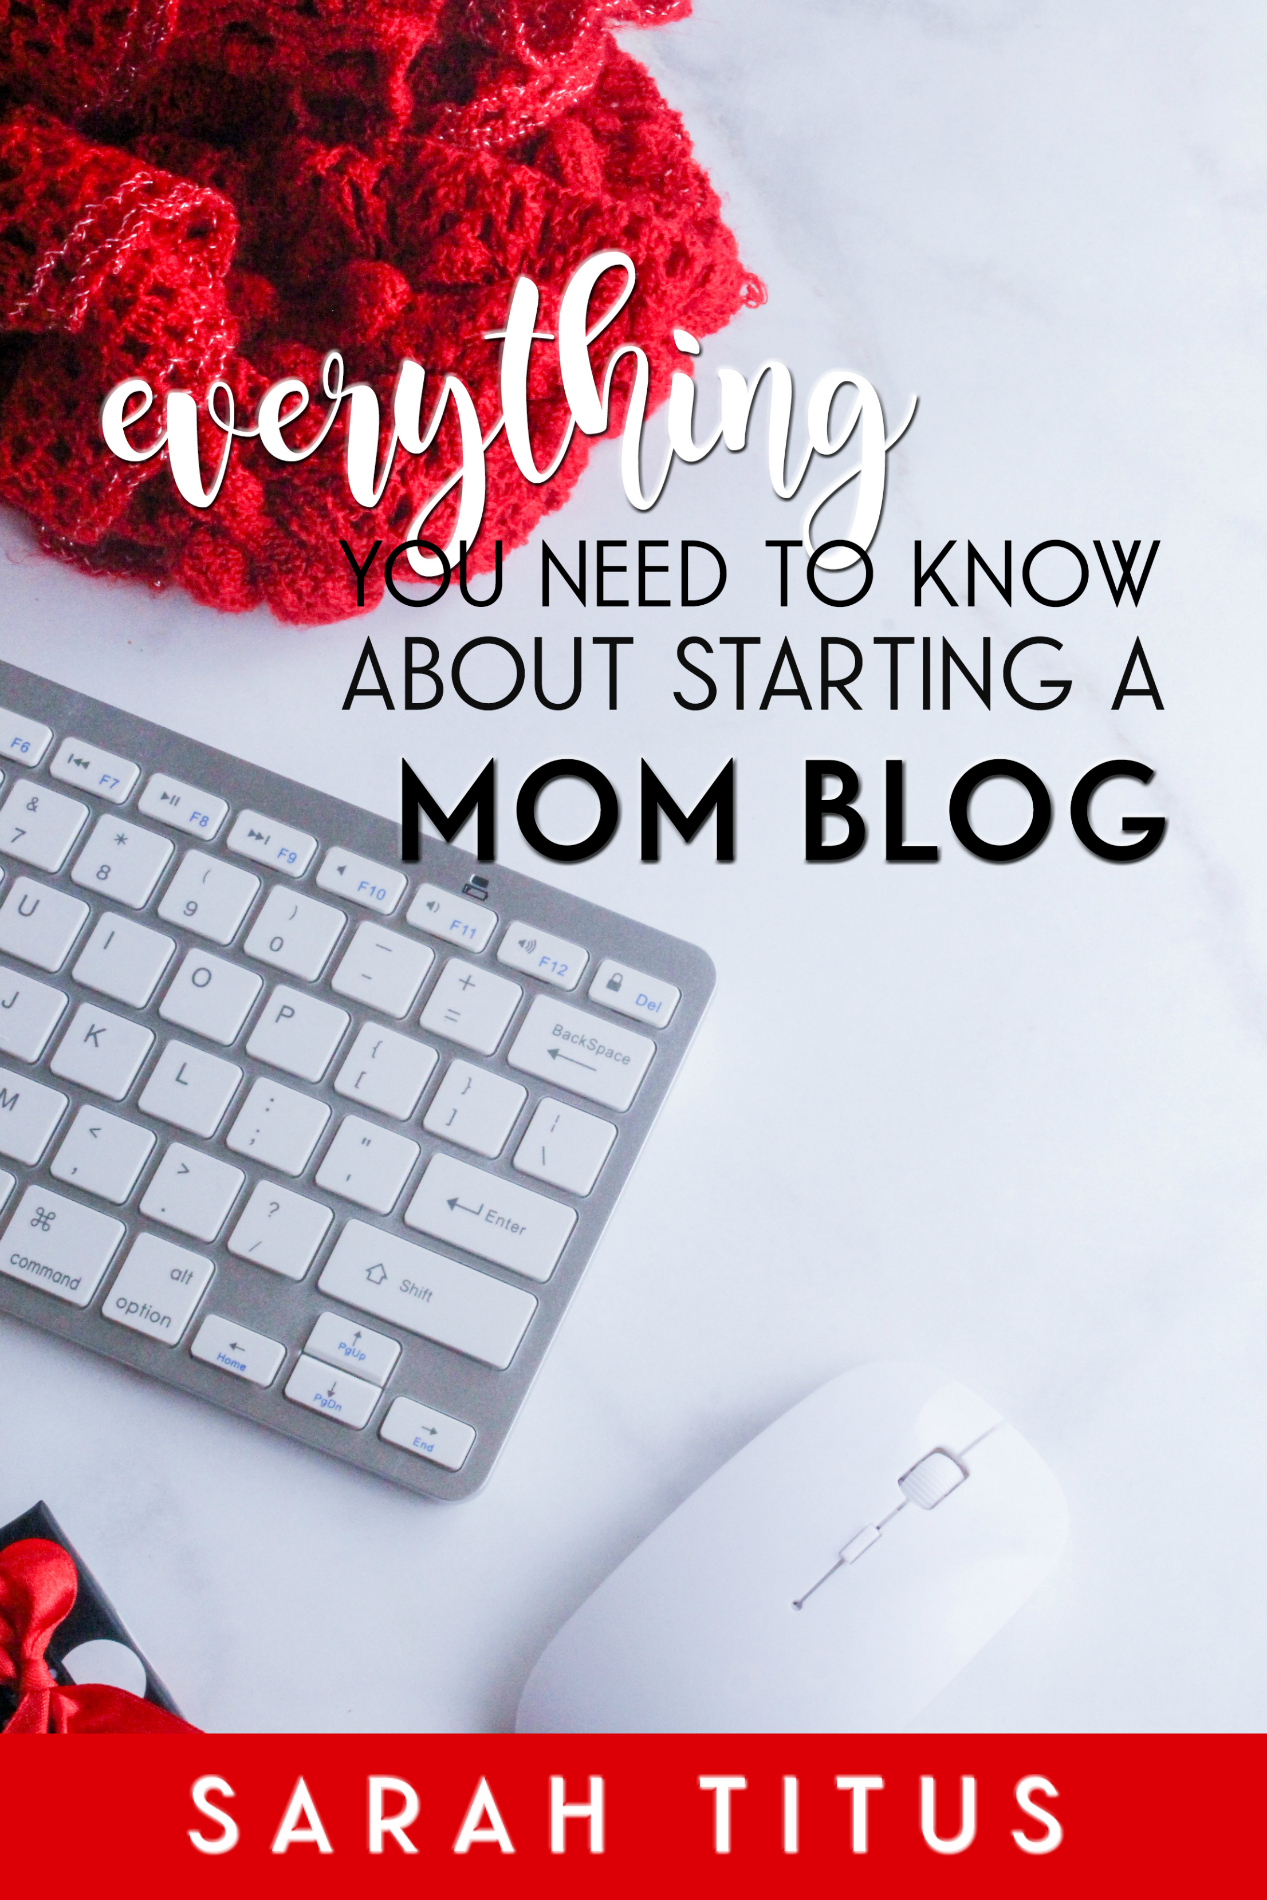 Starting a mom blog doesn't have to be overwhelming. You don't have to scour the internet trying to find the info. you need, it's all here in this ONE post!